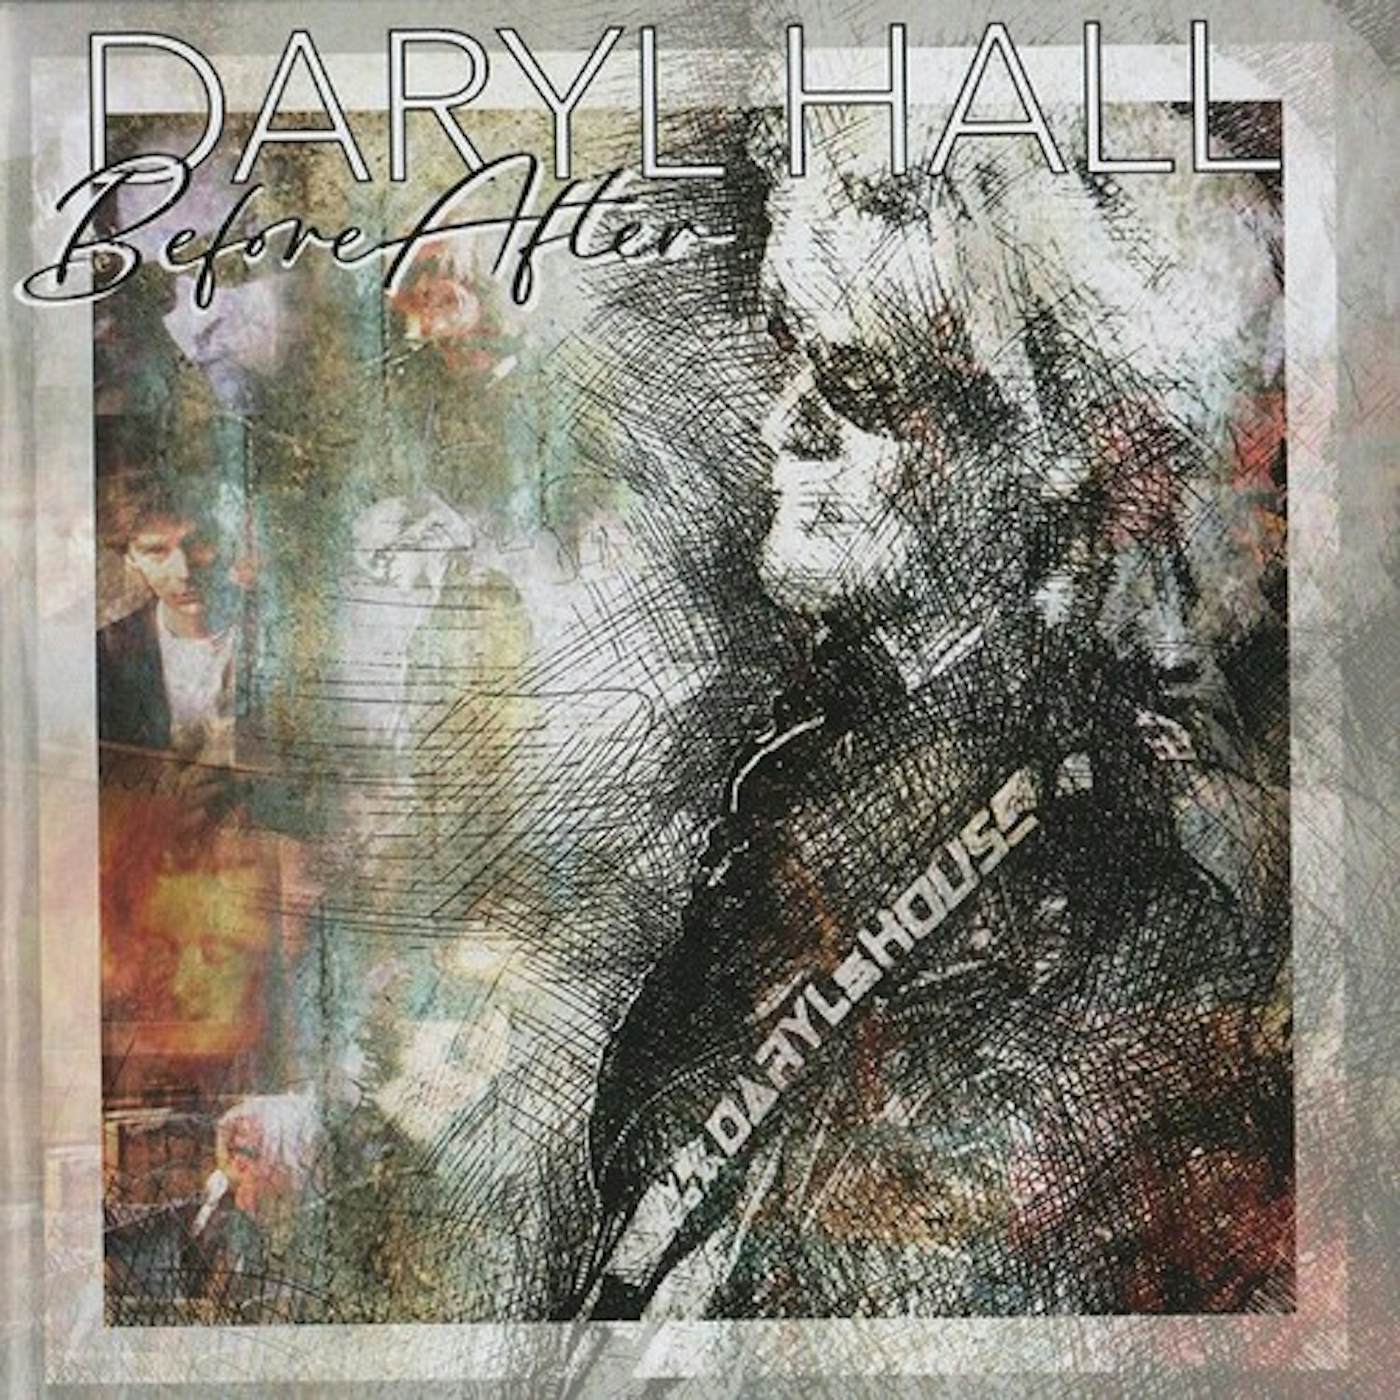 Daryl Hall BEFOREAFTER Vinyl Record